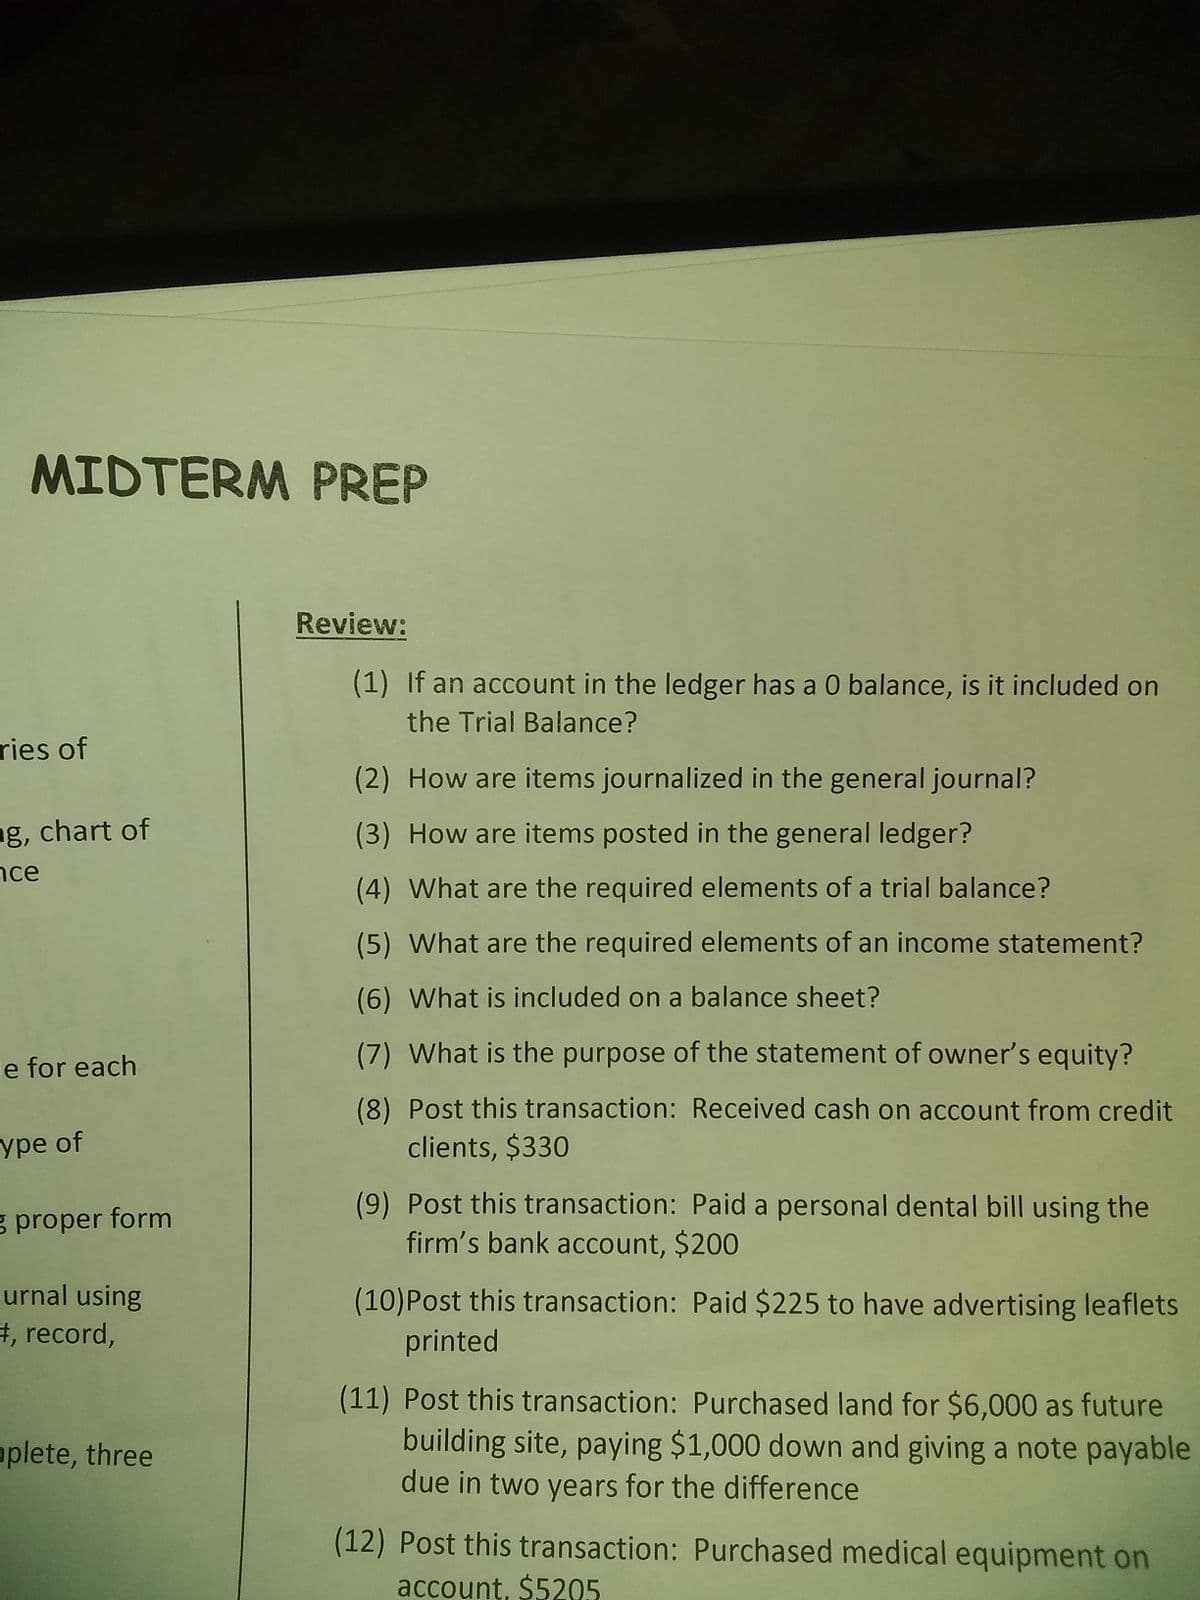 MIDTERM PREP
Review:
(1) If an account in the ledger has a 0 balance, is it included on
the Trial Balance?
ries of
(2) How are items journalized in the general journal?
ng, chart of
nce
(3) How are items posted in the general ledger?
(4) What are the required elements of a trial balance?
(5) What are the required elements of an income statement?
(6) What is included on a balance sheet?
ie for each
(7) What is the purpose of the statement of owner's equity?
ype of
(8) Post this transaction: Received cash on account from credit
clients, $330
(9) Post this transaction: Paid a personal dental bill using the
firm's bank account, $200
g proper form
urnal using
#, record,
(10)Post this transaction: Paid $225 to have advertising leaflets
printed
(11) Post this transaction: Purchased land for $6,000 as future
building site, paying $1,000 down and giving a note payable
due in two years for the difference
mplete, three
(12) Post this transaction: Purchased medical equipment on
account, $5205
